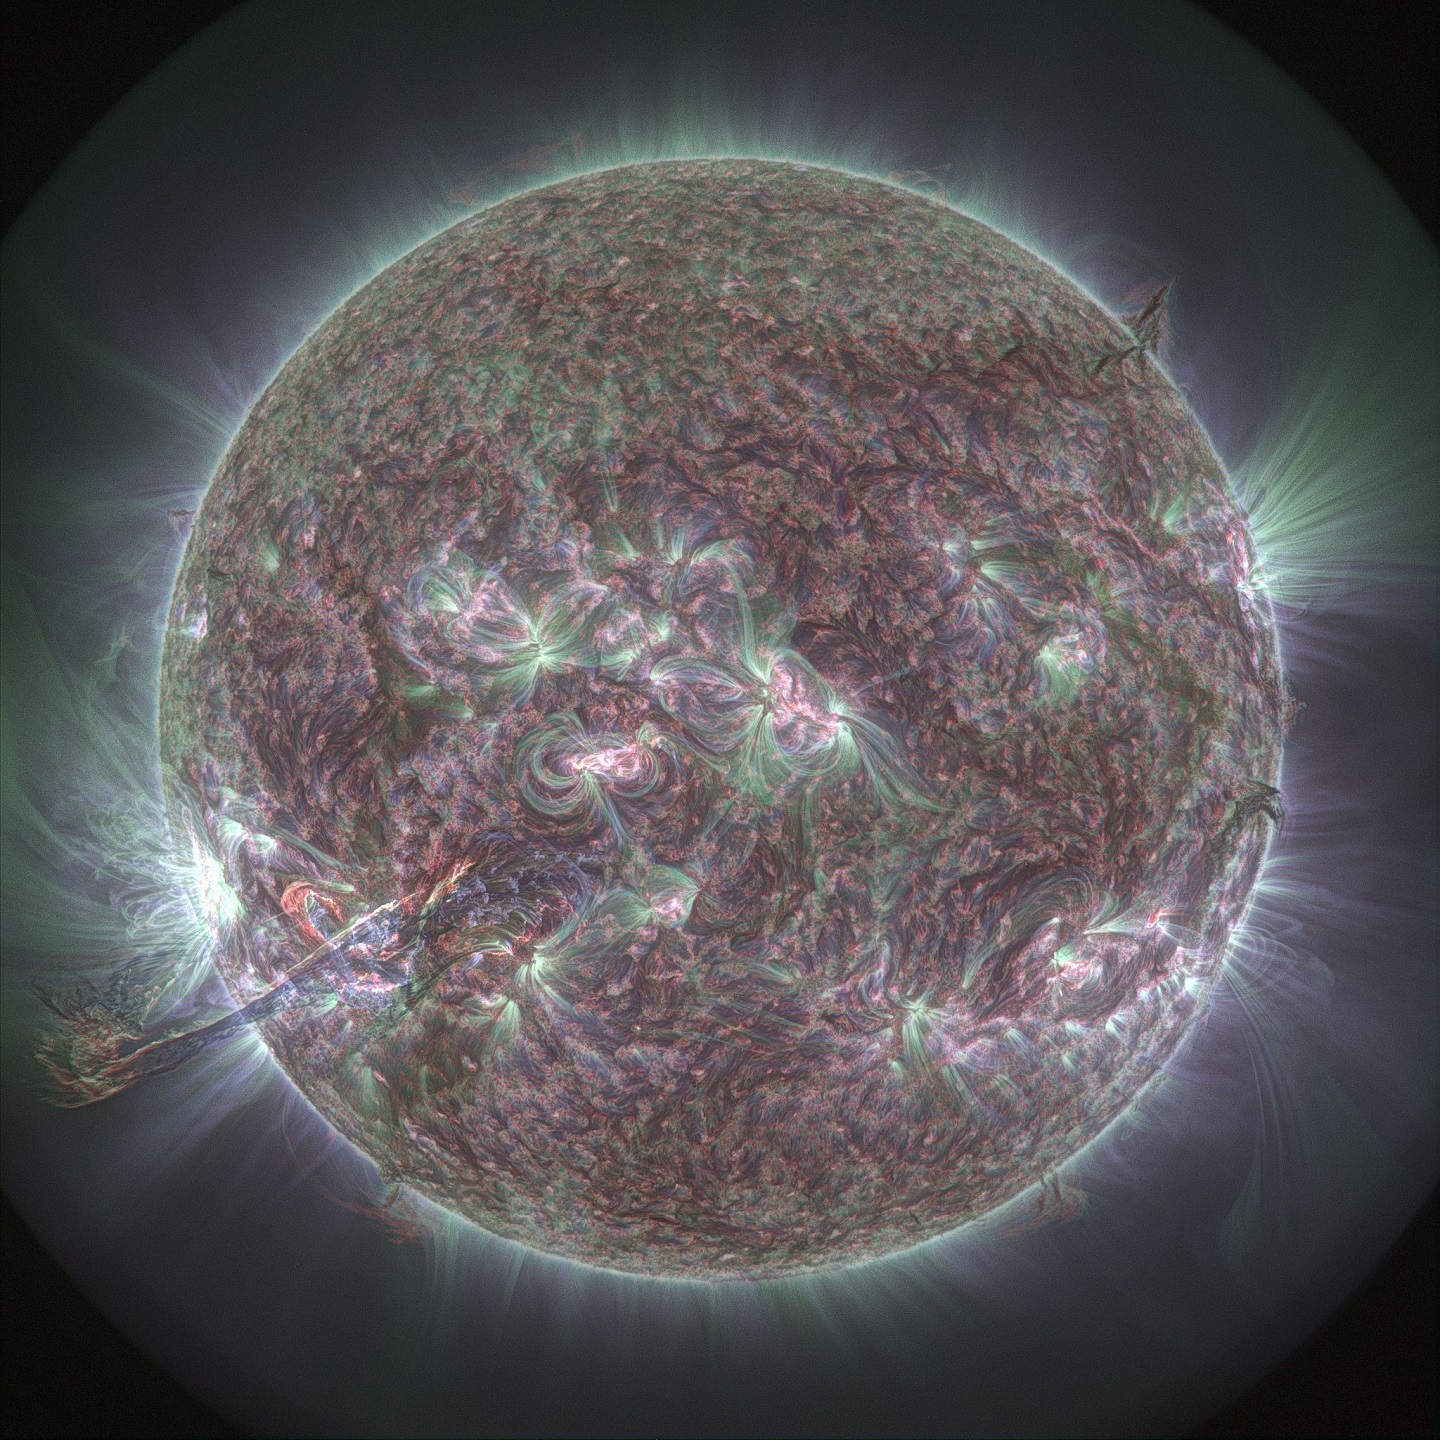 Photo credit: NASA/SDO, with image processing by Dr Huw Morgan, Aberystwyth University